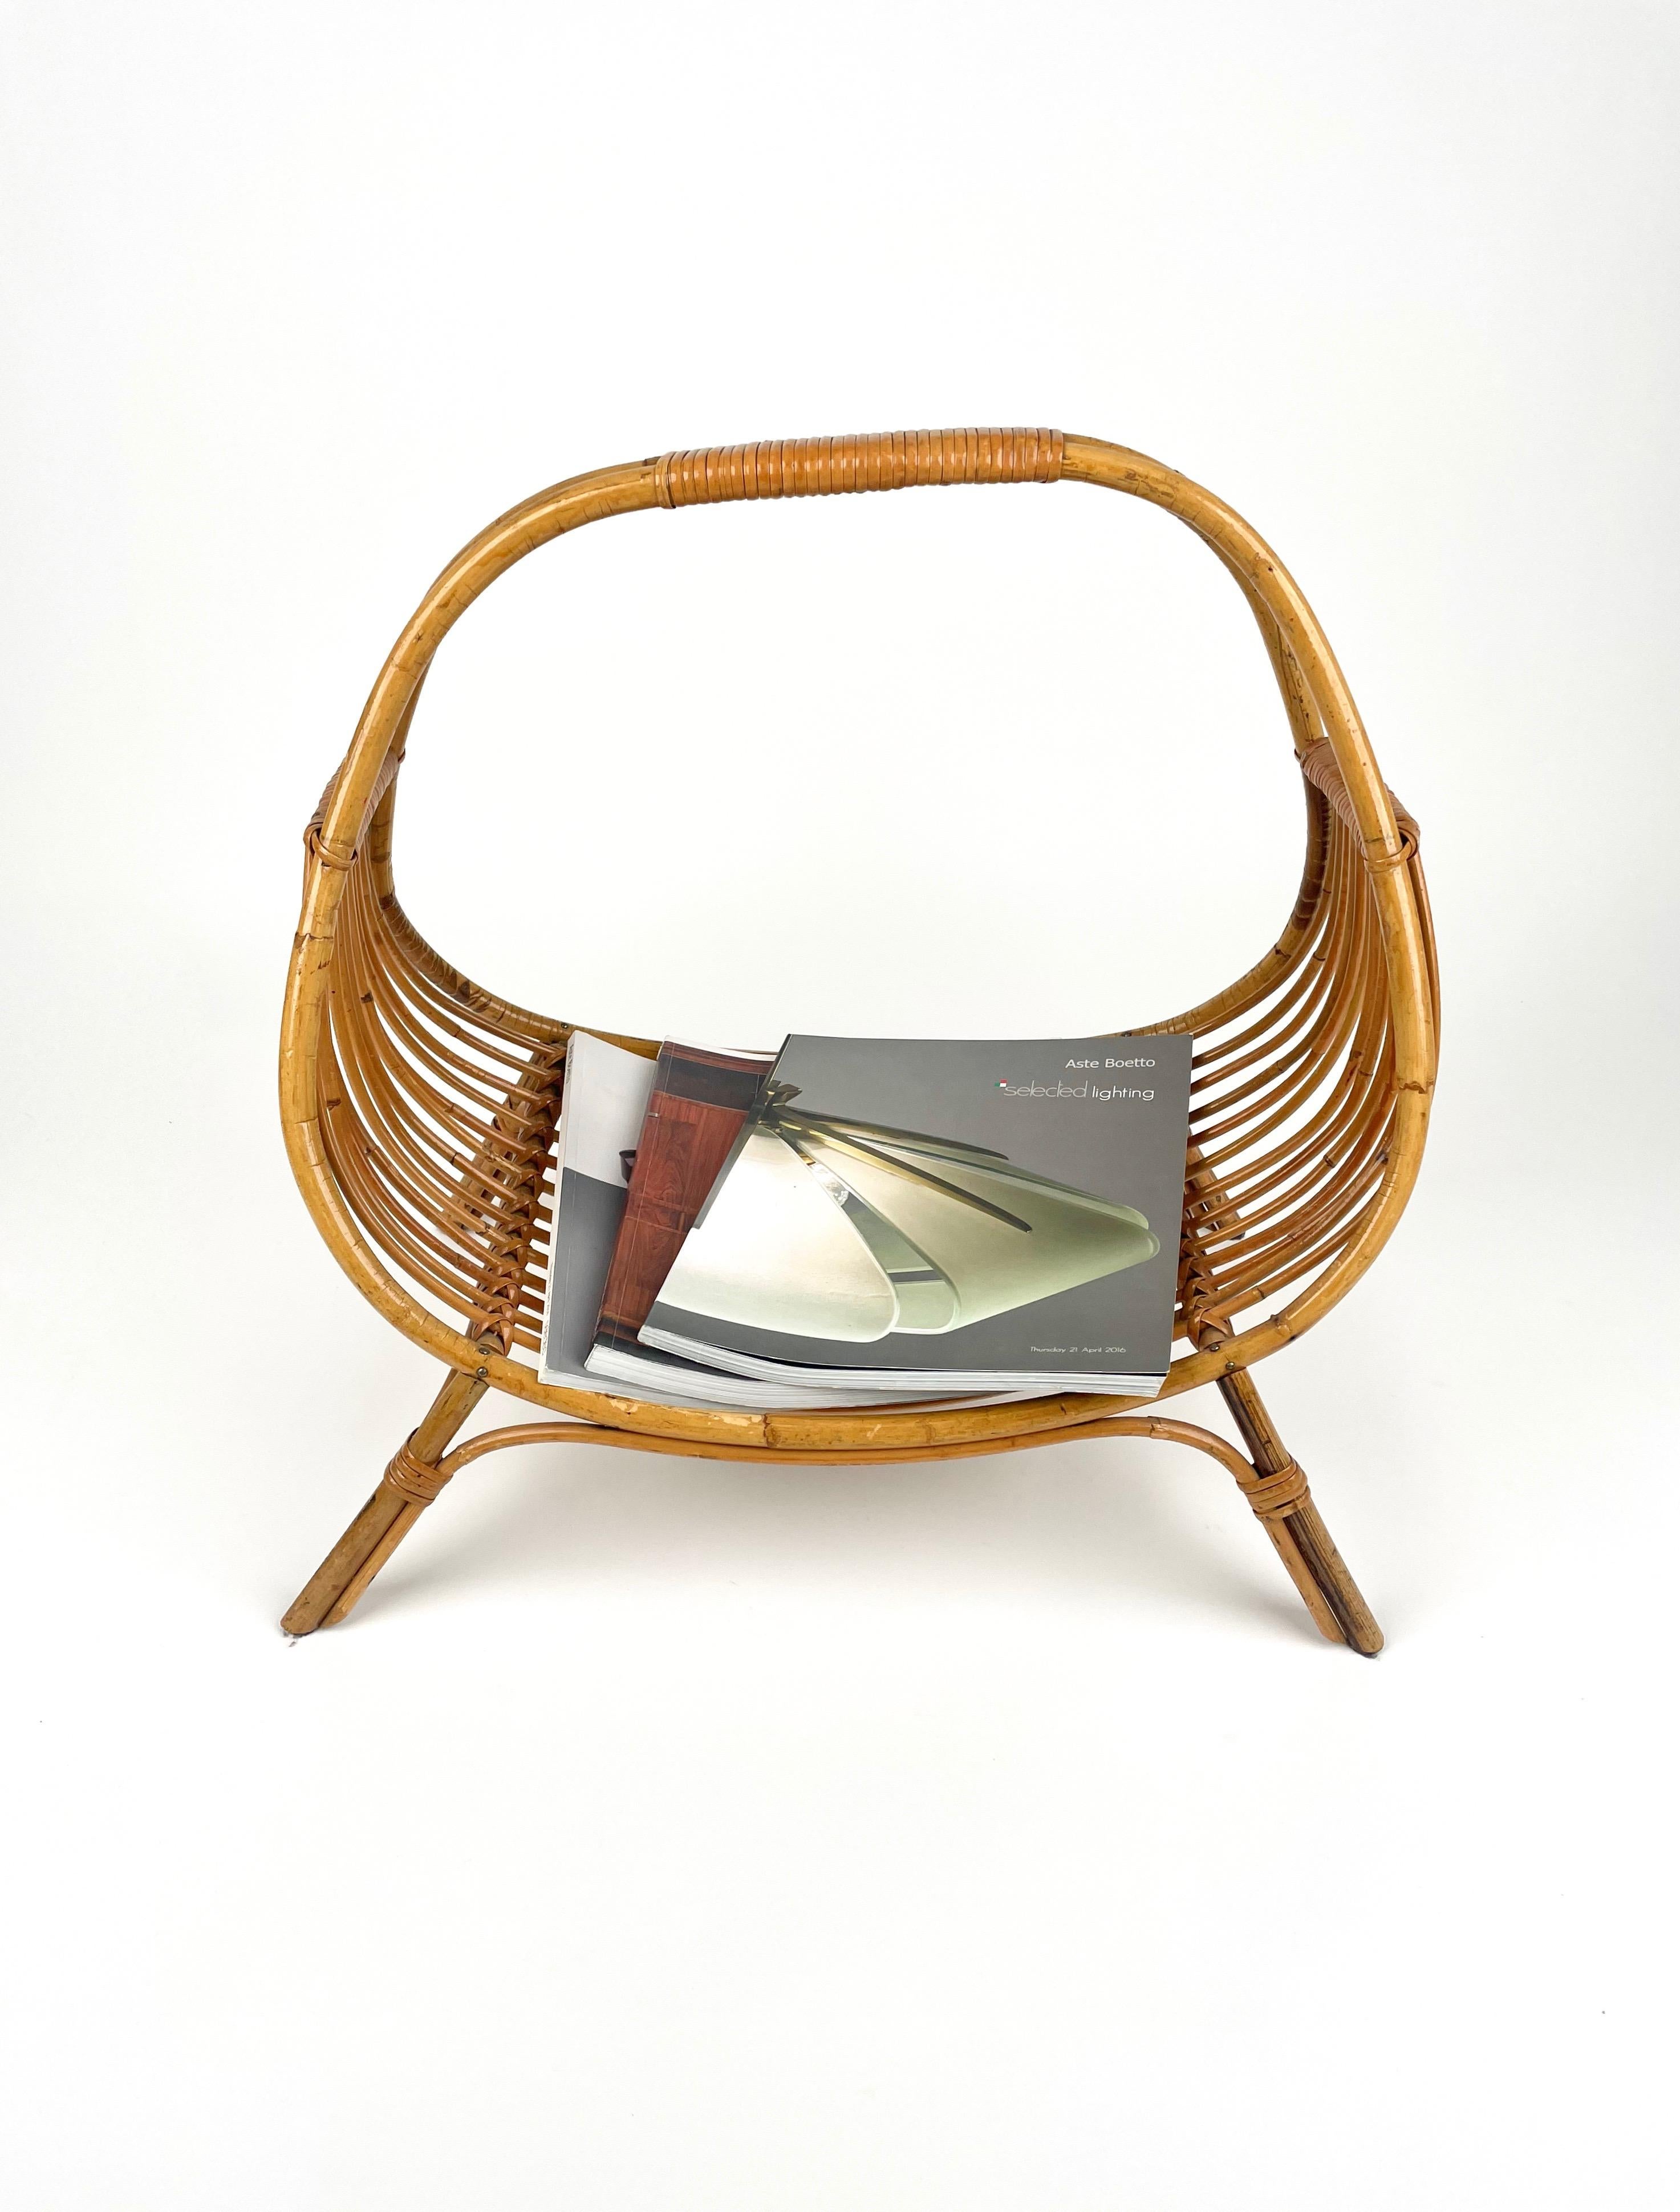 Midcentury Rattan & Bamboo Curved Magazine Rack, Italy 1960s For Sale 1